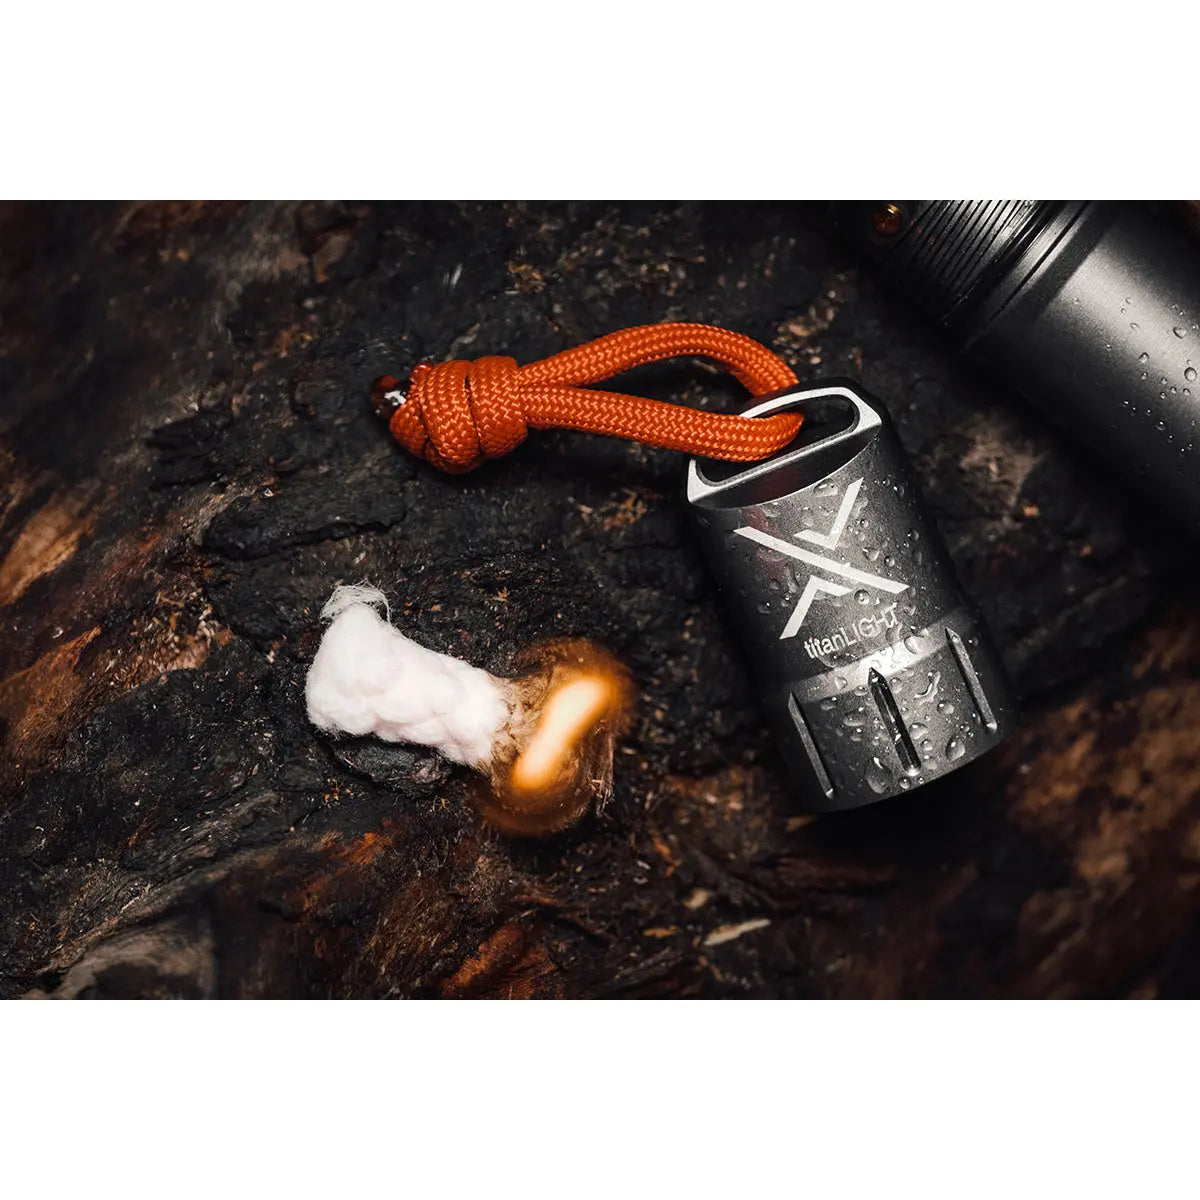 Exotac quickLIGHT High Performance Waterproof Tinder in Trapped Blister Exotac